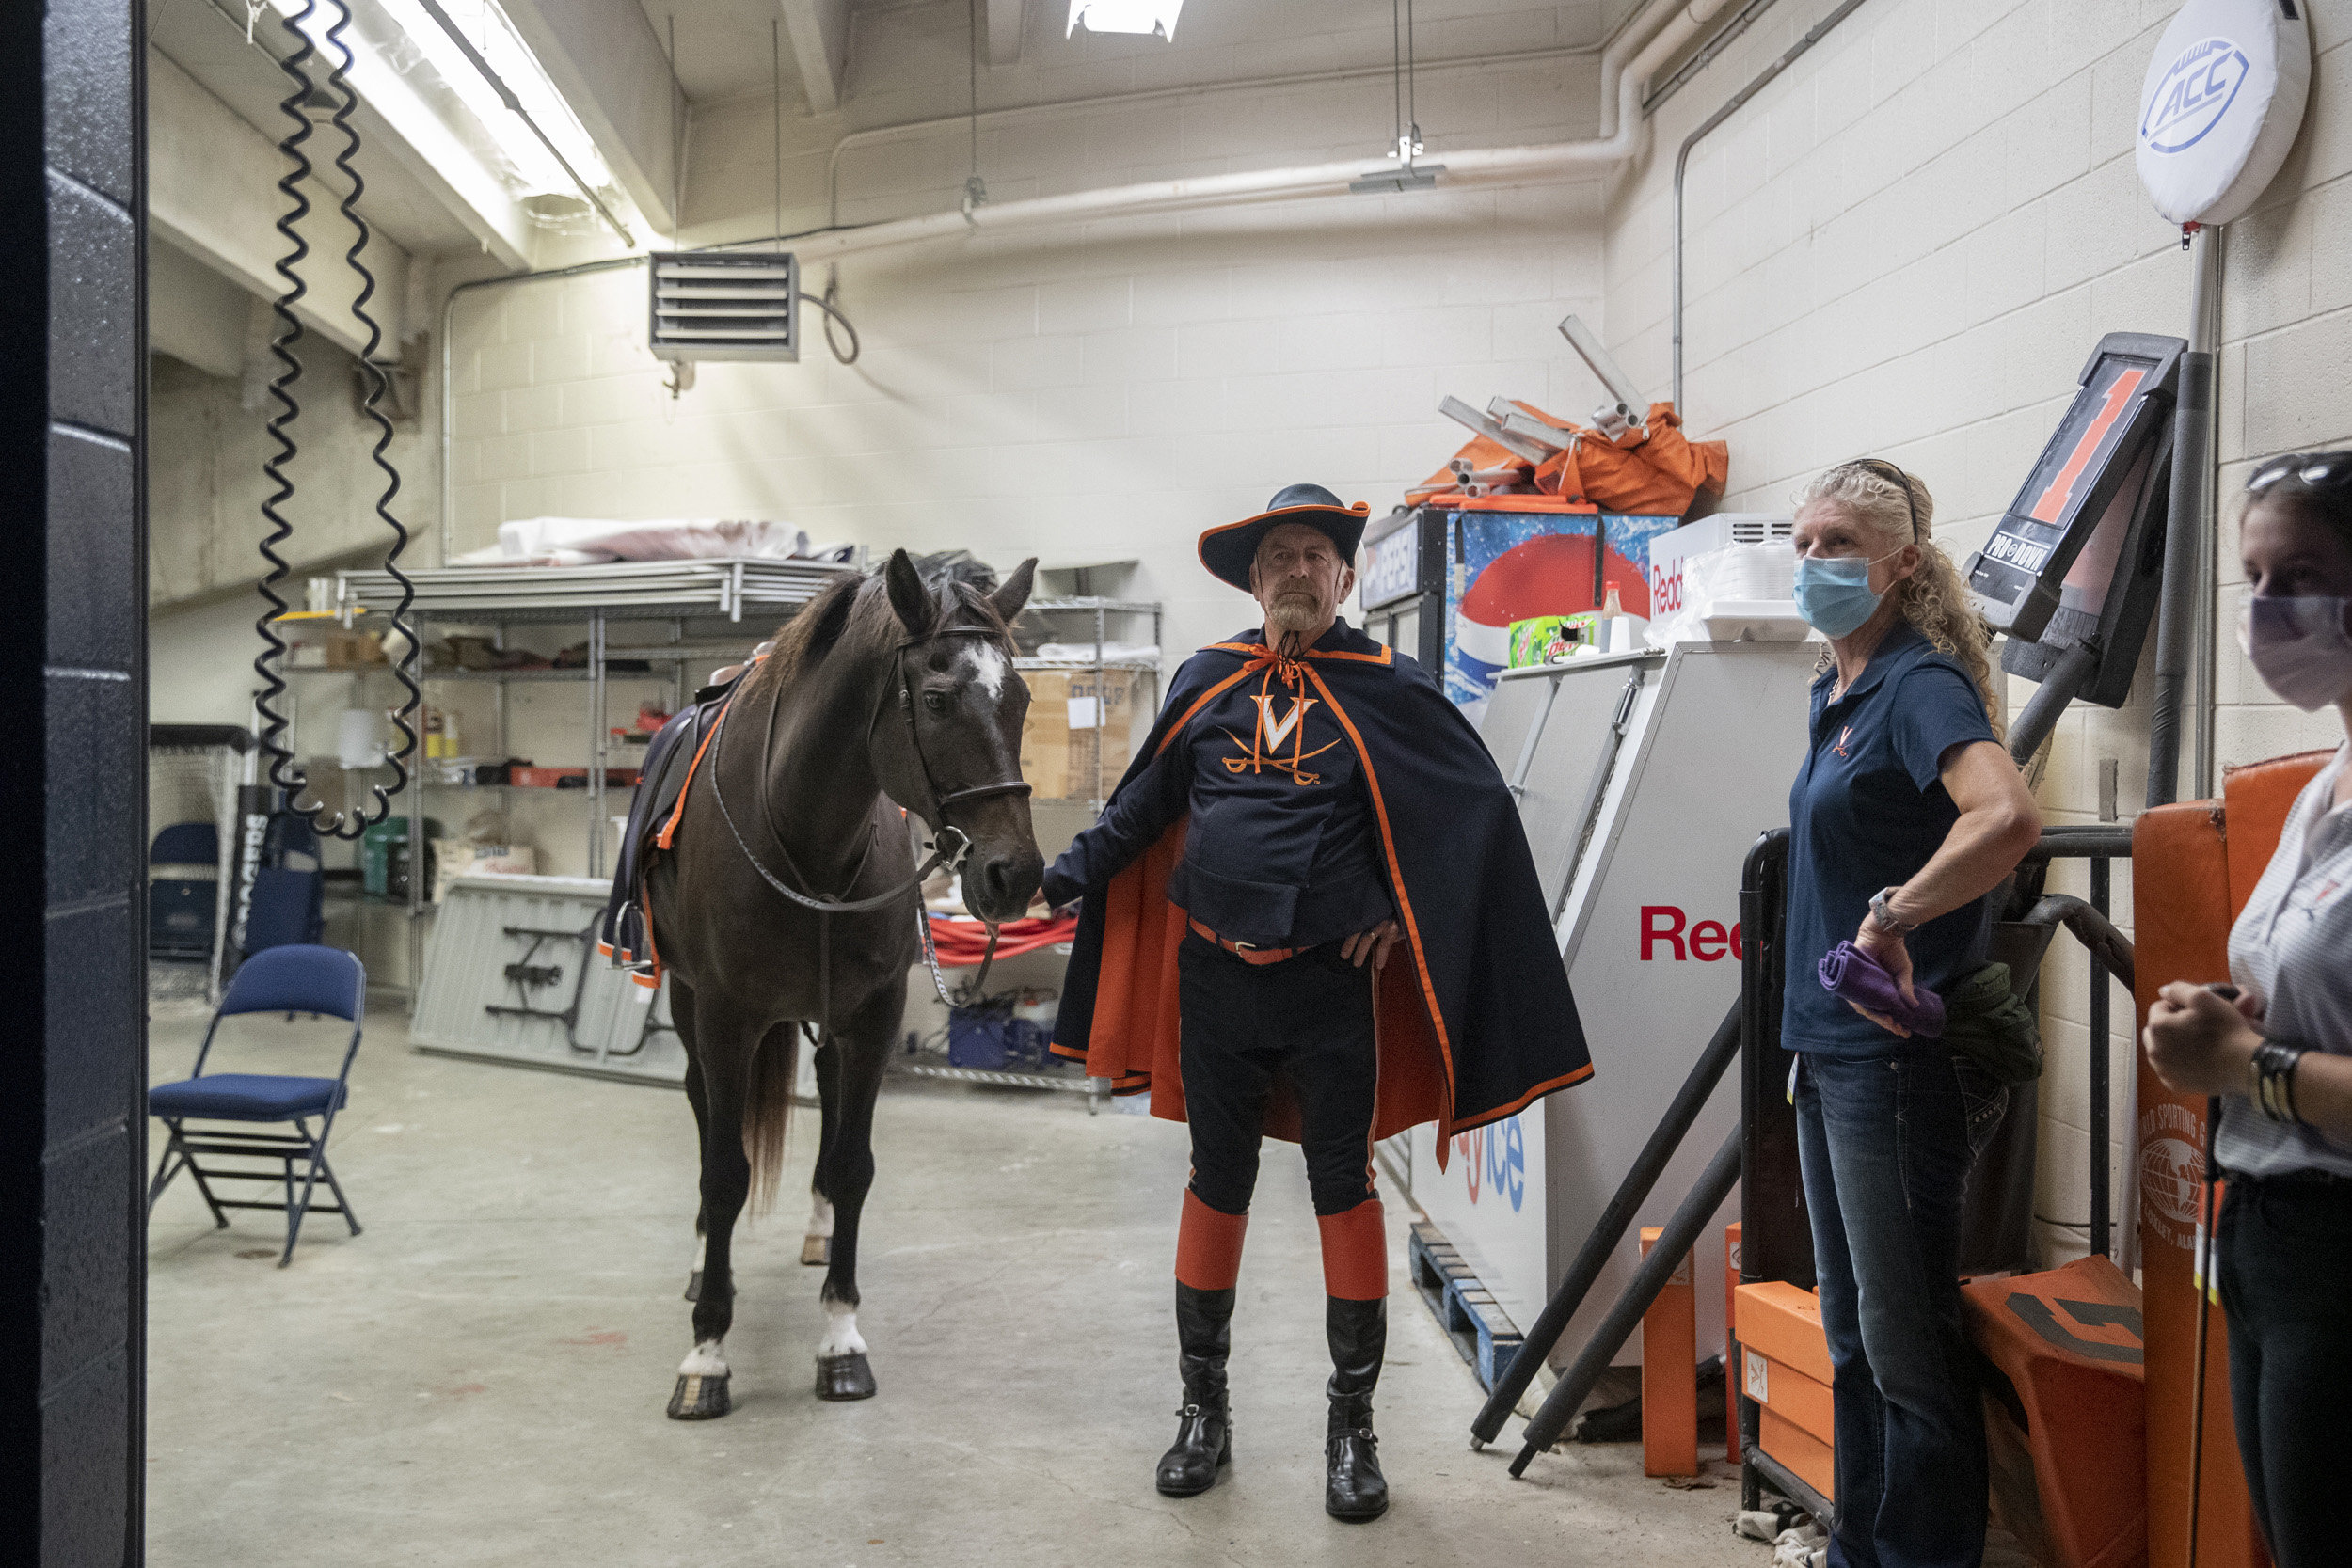 Man dressed in UVA hat, cape and UVA shirt with horse before the Football game